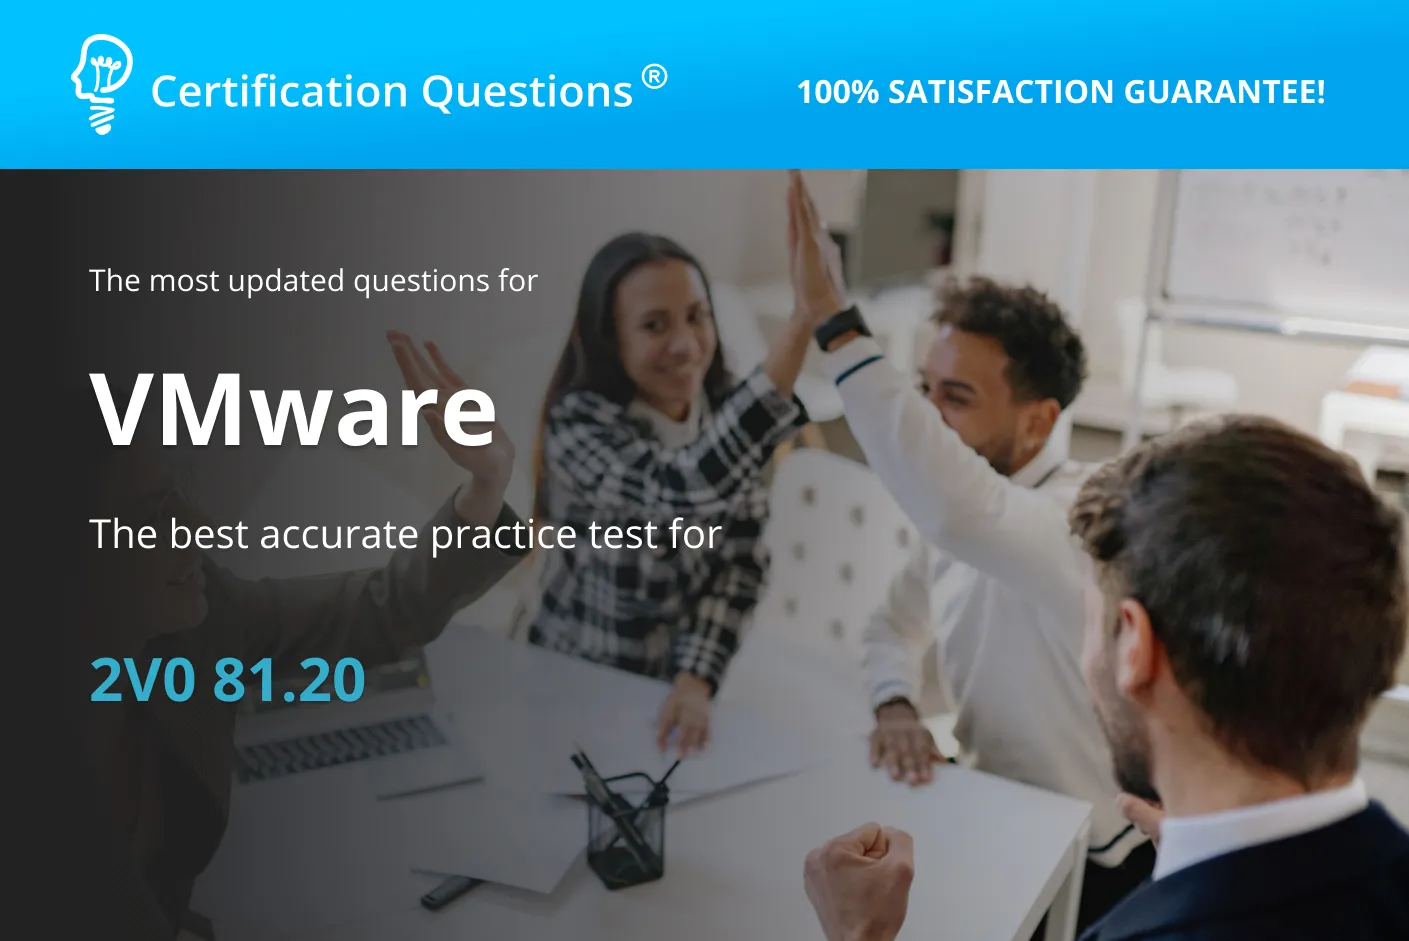 This image represents the vmware 2V0-81.20 exam questions